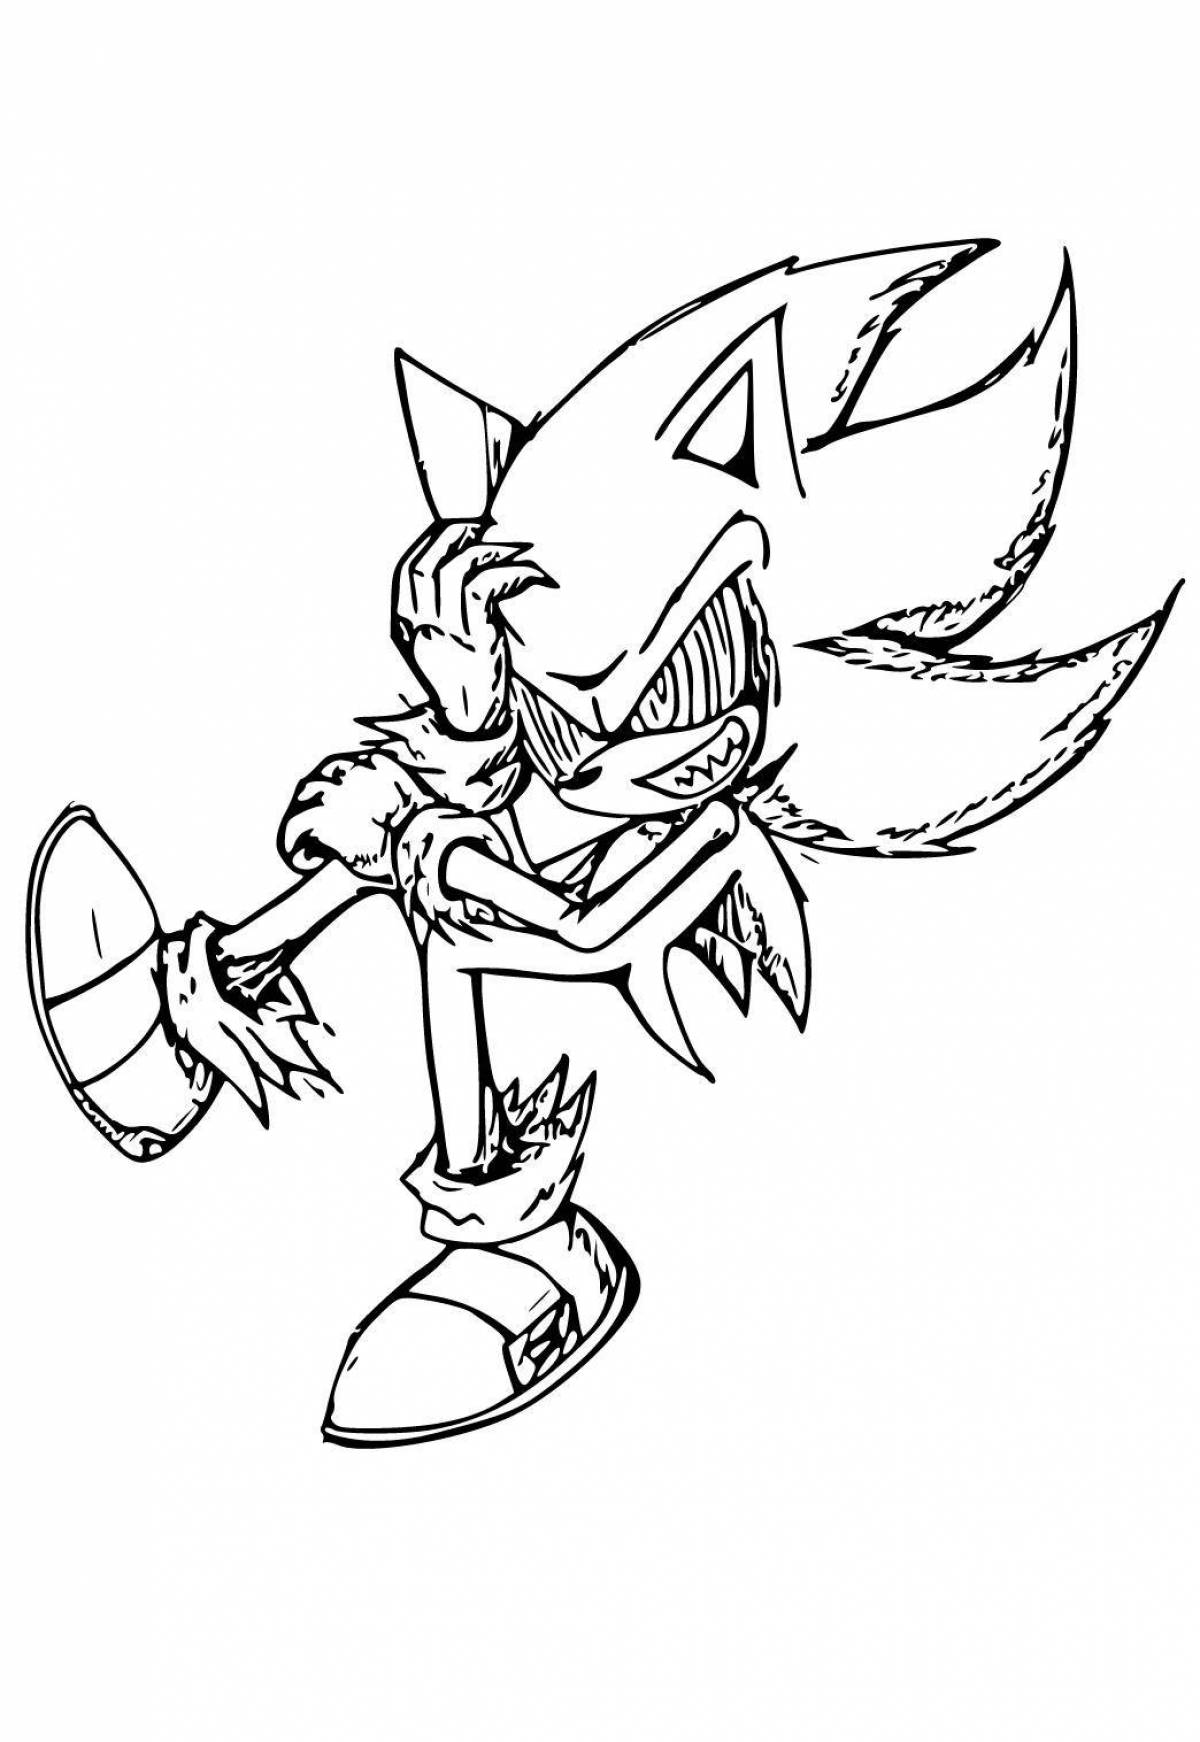 Charming dark sonic coloring page